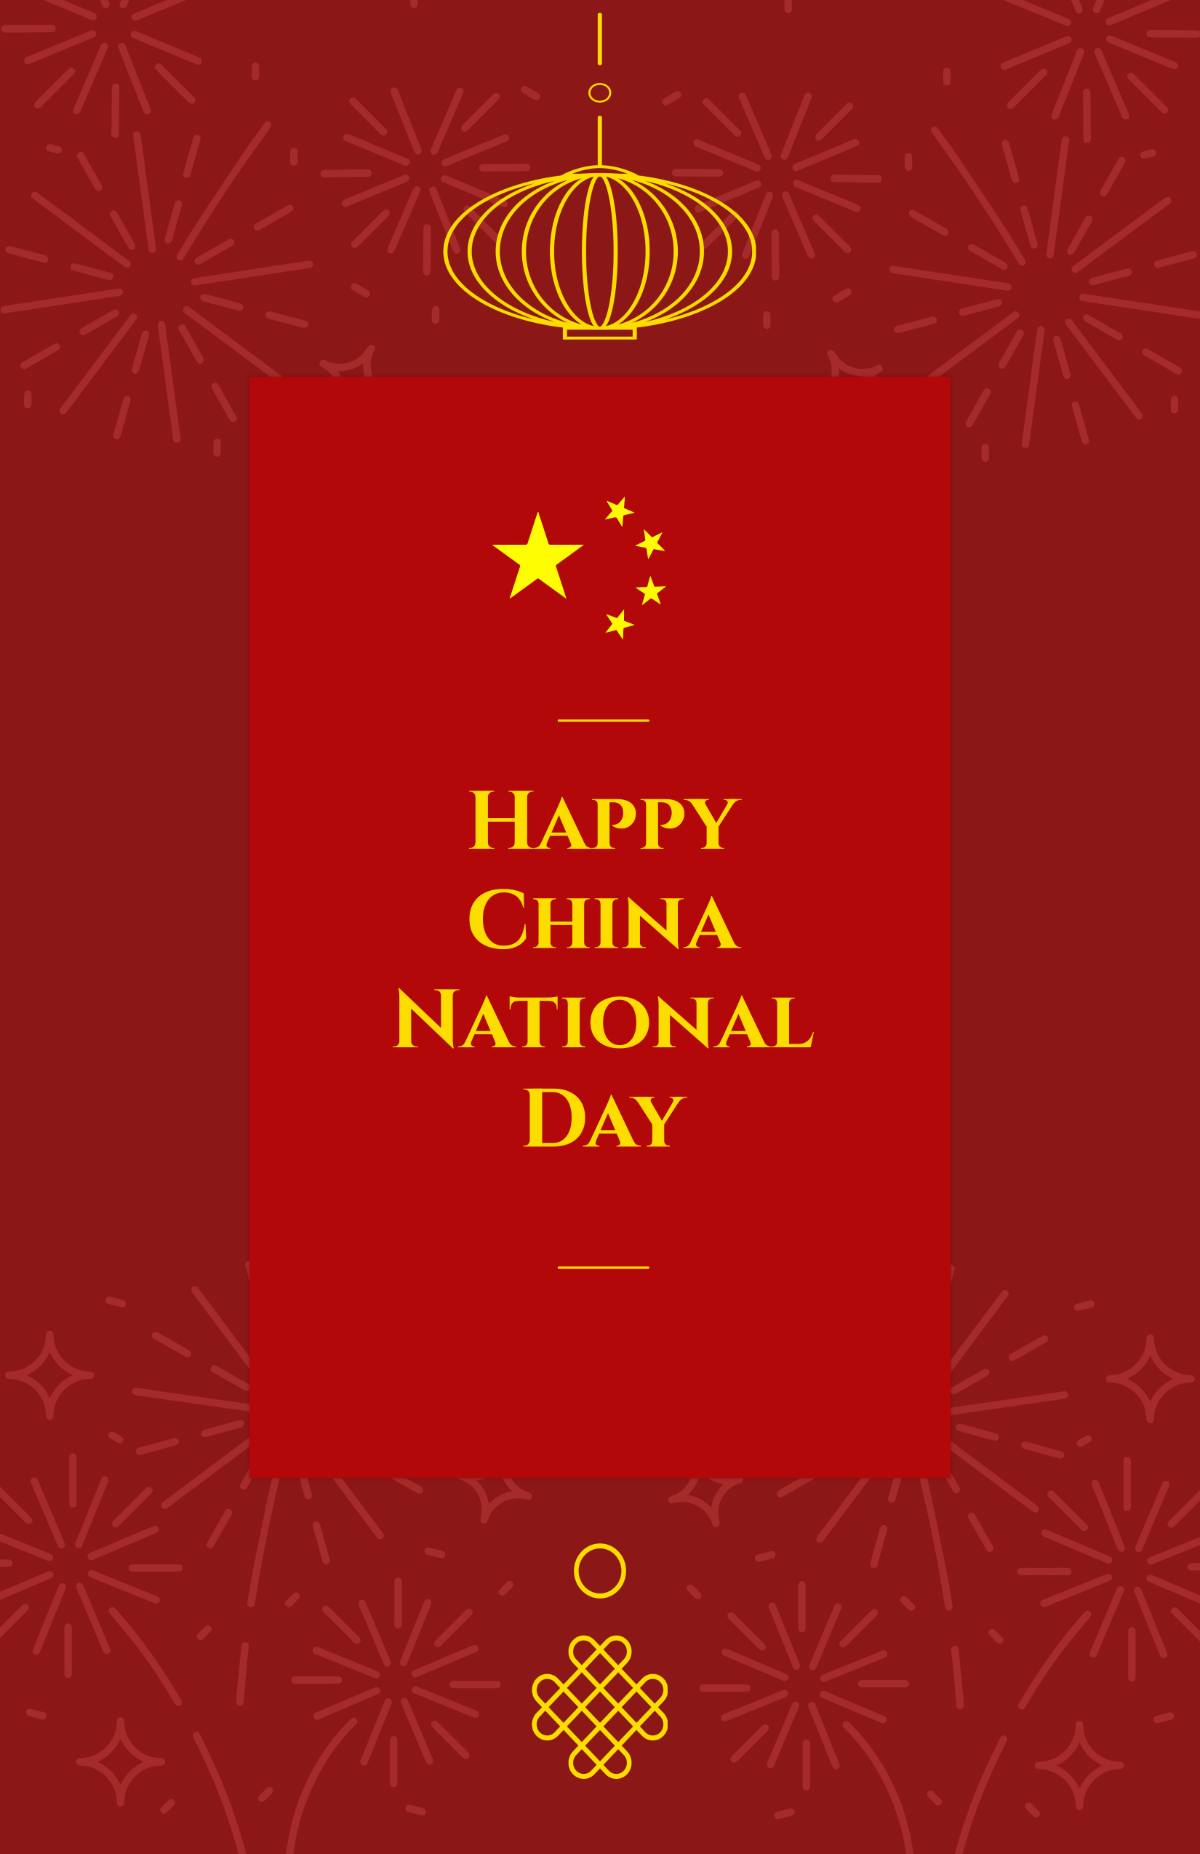 Free China National Day Poster Template